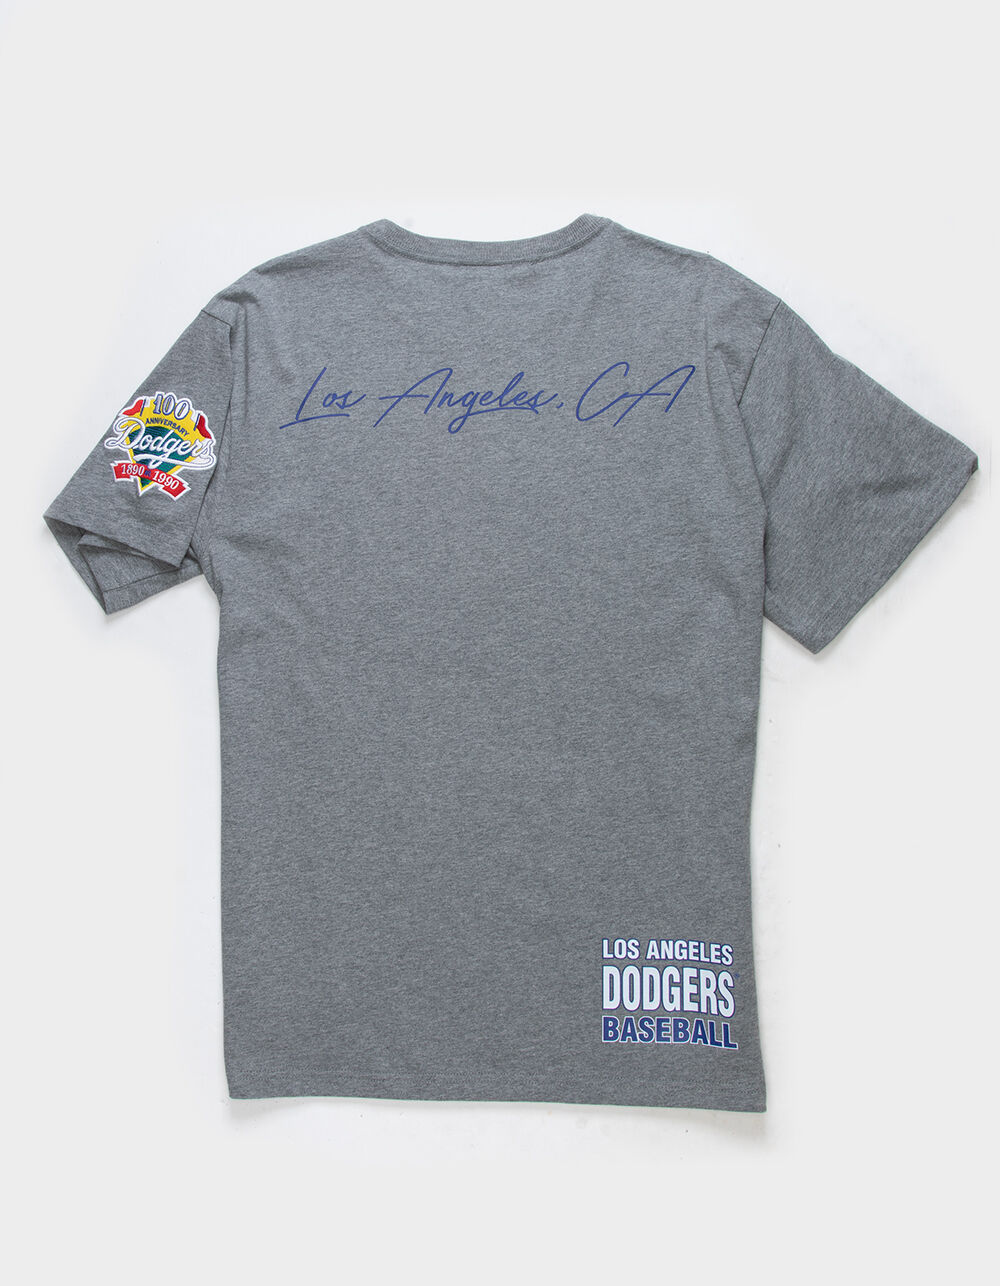 MITCHELL & NESS Los Angeles Dodgers Mens Tee   HEATHER GRAY   Tillys